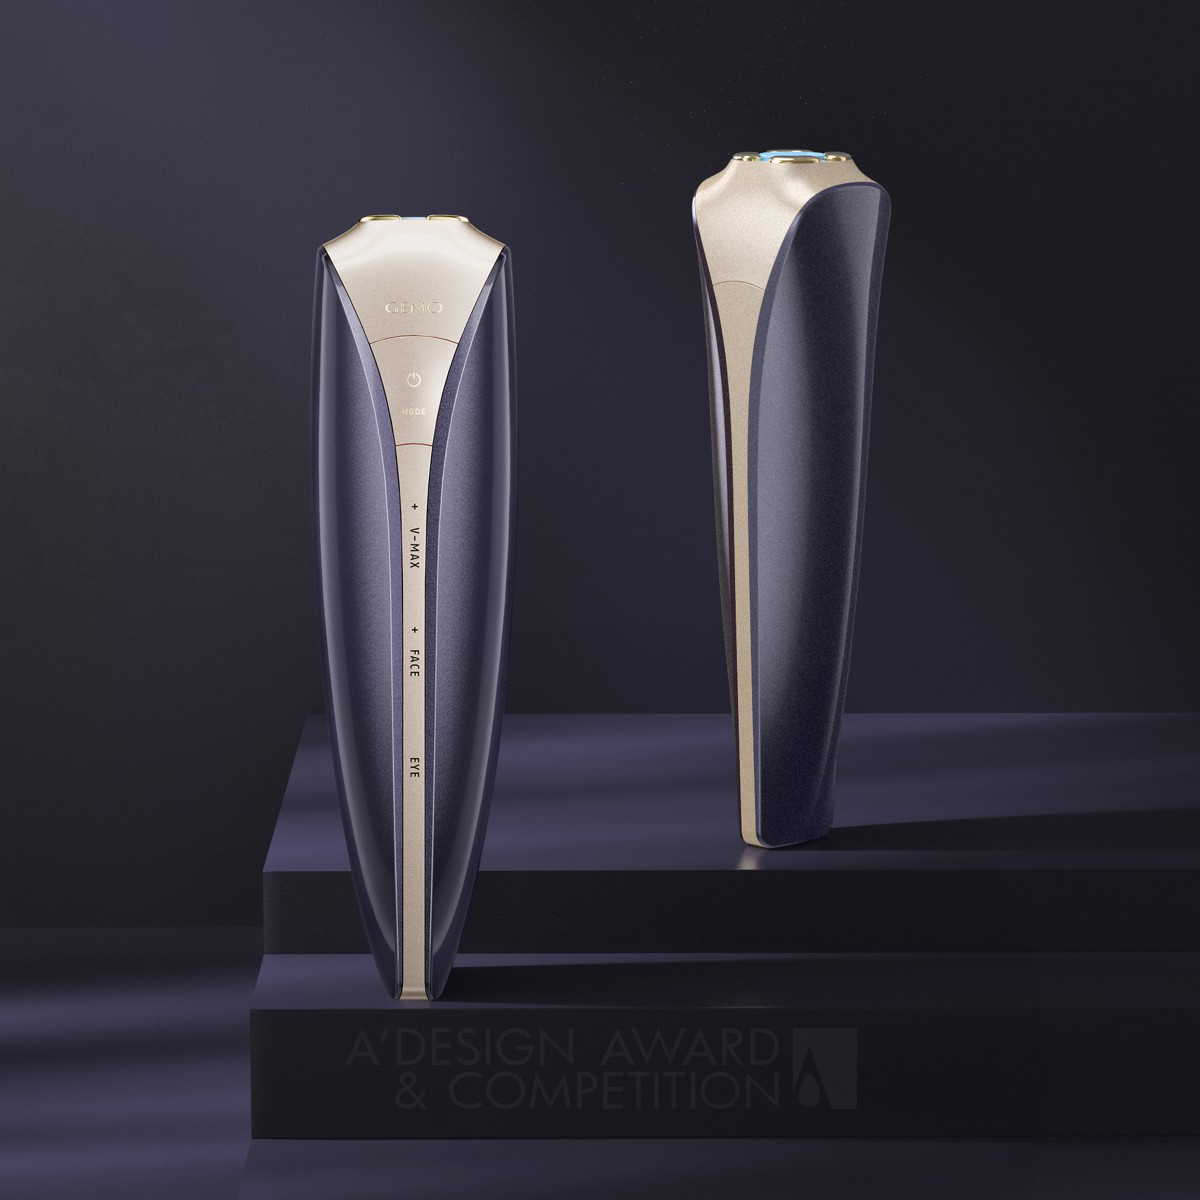 Hangzhou GEMO Technology Co., Ltd. wins Silver at the prestigious A' Beauty, Personal Care and Cosmetic Products Design Award with Gemo Luxury Beauty Device G10 Skin Care.